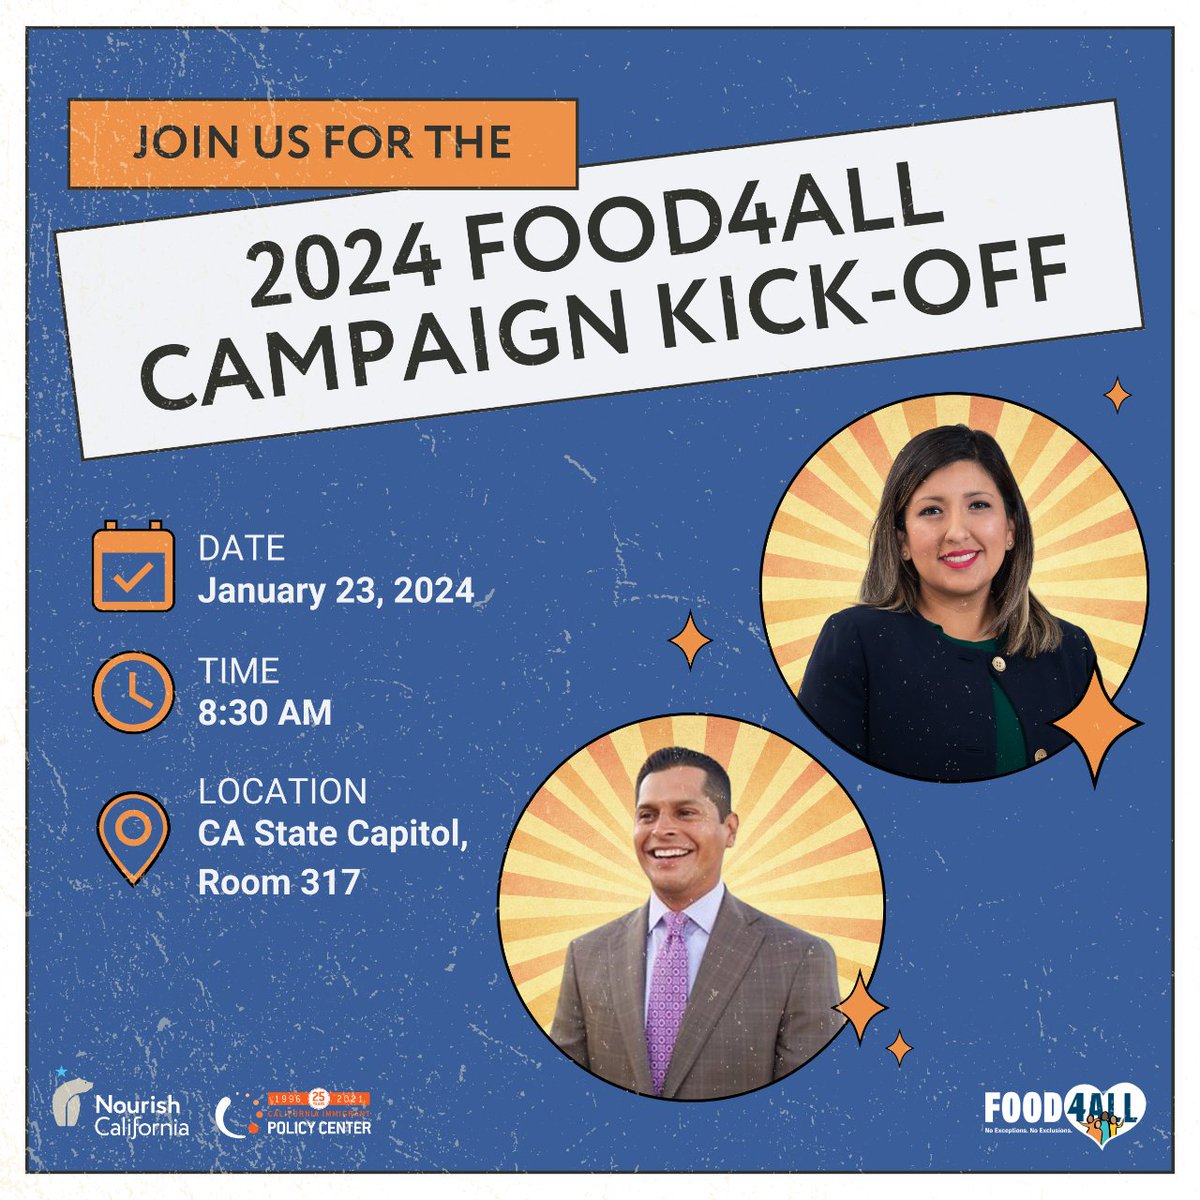 Today is the 2024 #Food4All campaign kick-off!! @Nourish_CA & @CALImmigrant will be joined by .@senator_hurtado and .@msantiagoad54, so make sure you tune in to our livestream on @CALImmigrant’s Facebook or @Nourish_CA’s Instagram at 8:30AM! #NoExceptionsNoExclusions #NoDelaysn